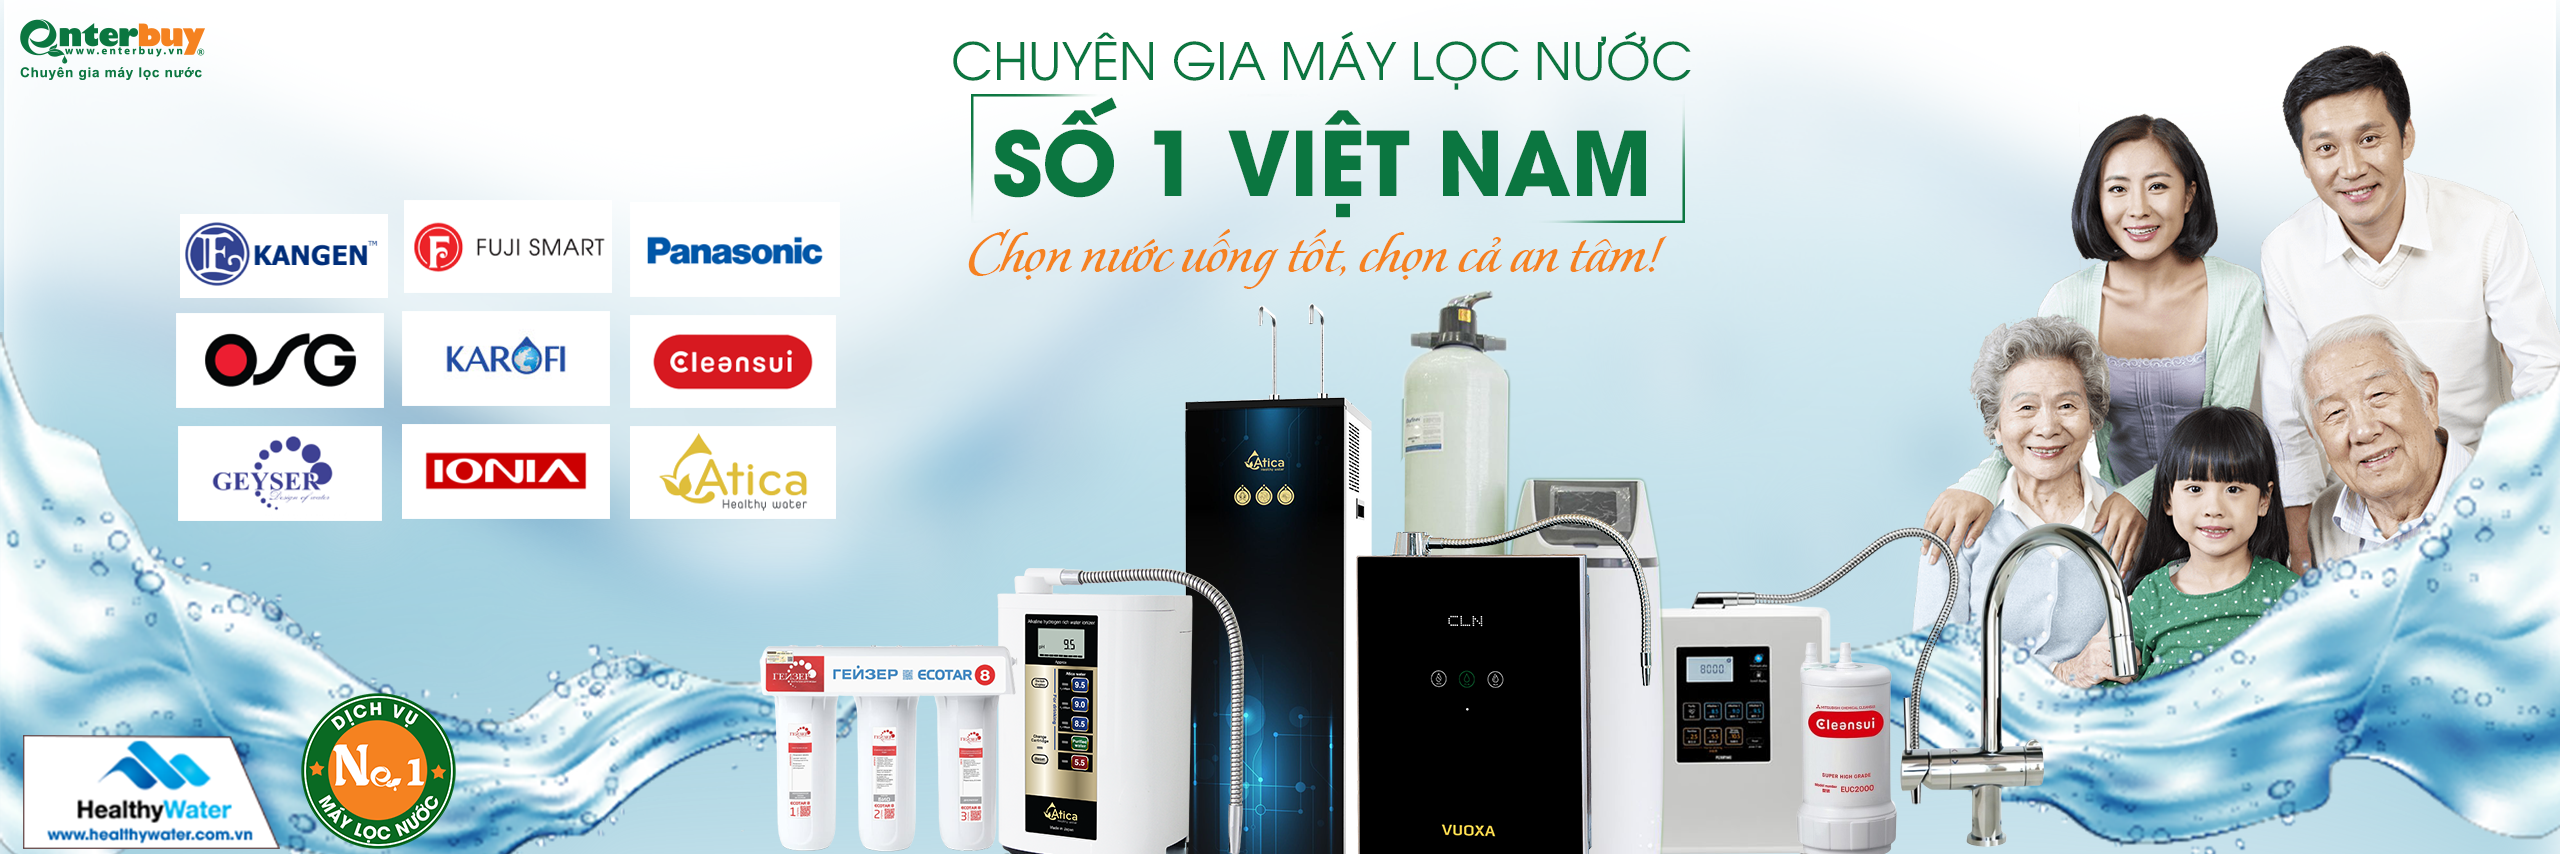 BANNER MAY-LOC-NUOC